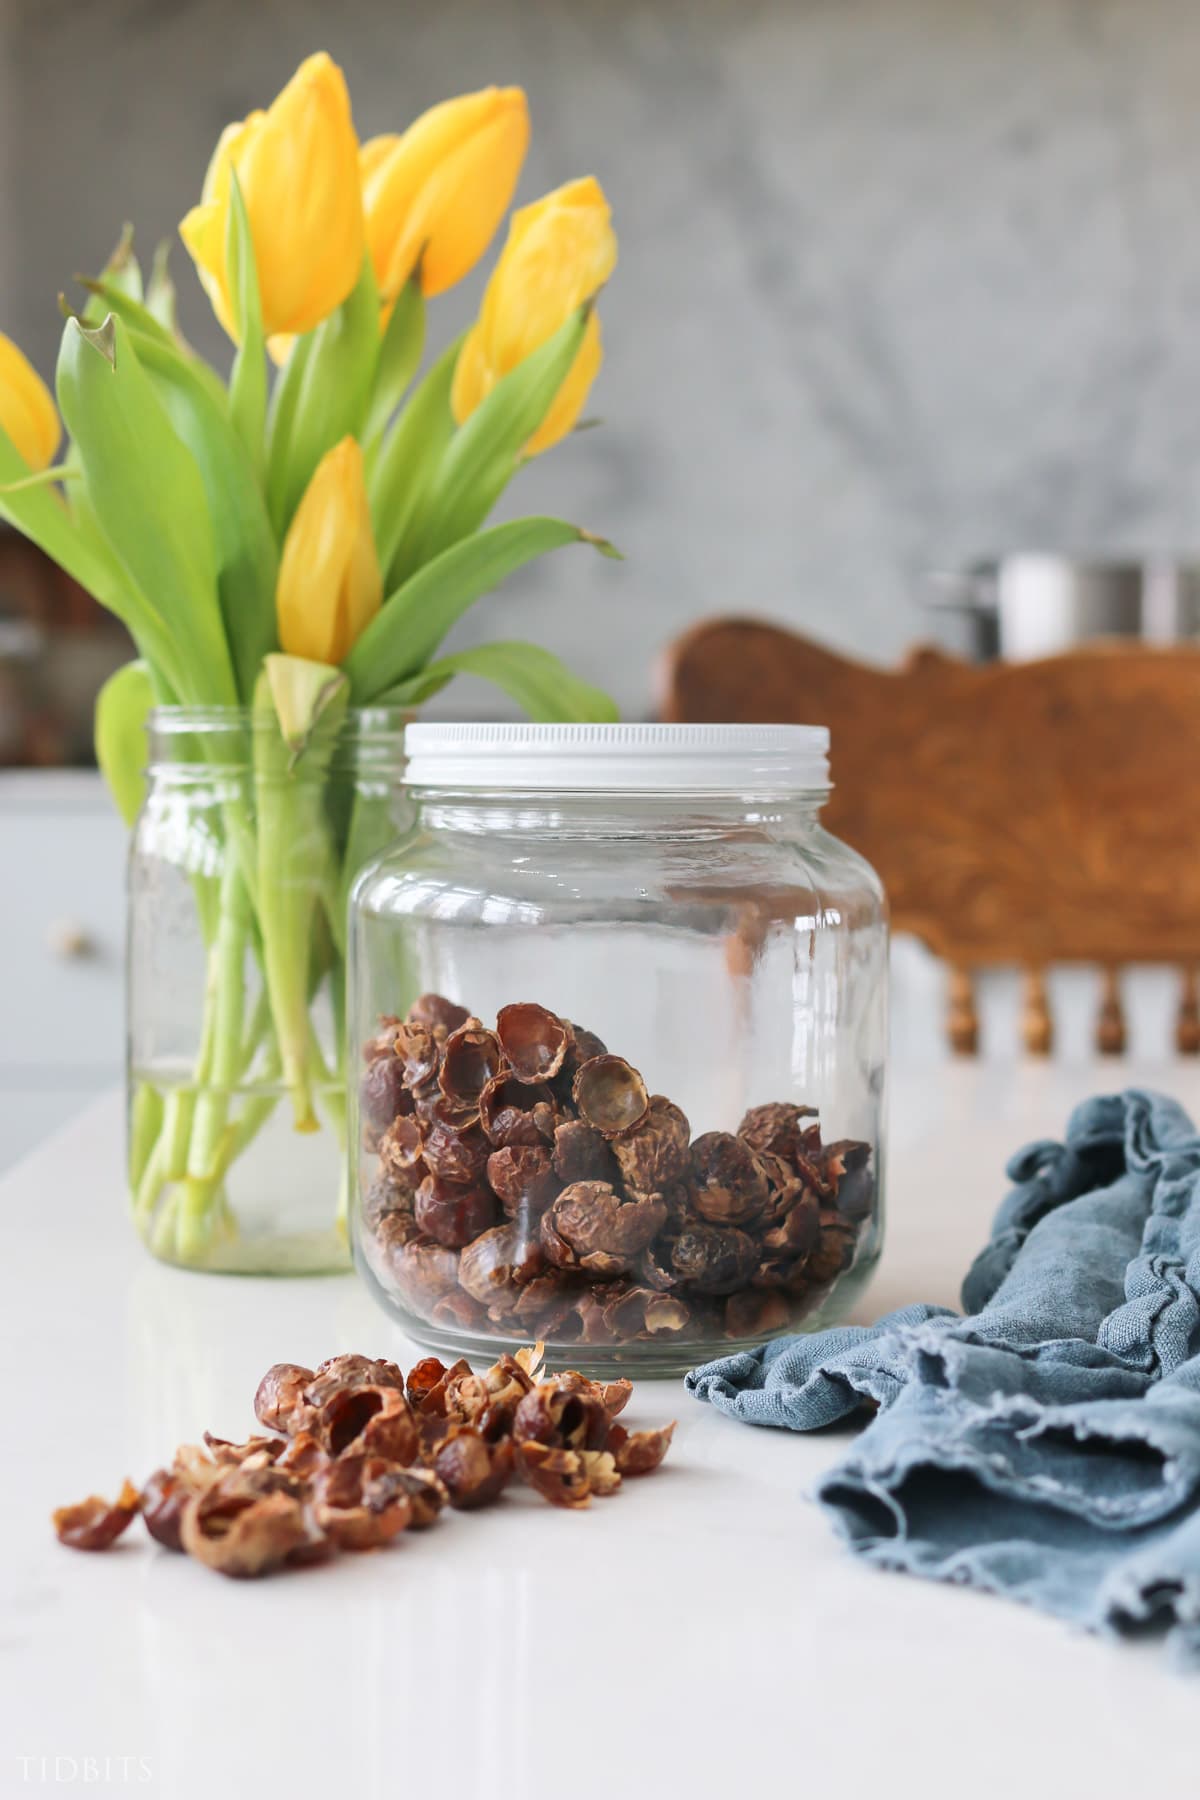 What are soap nuts and what can you make with them